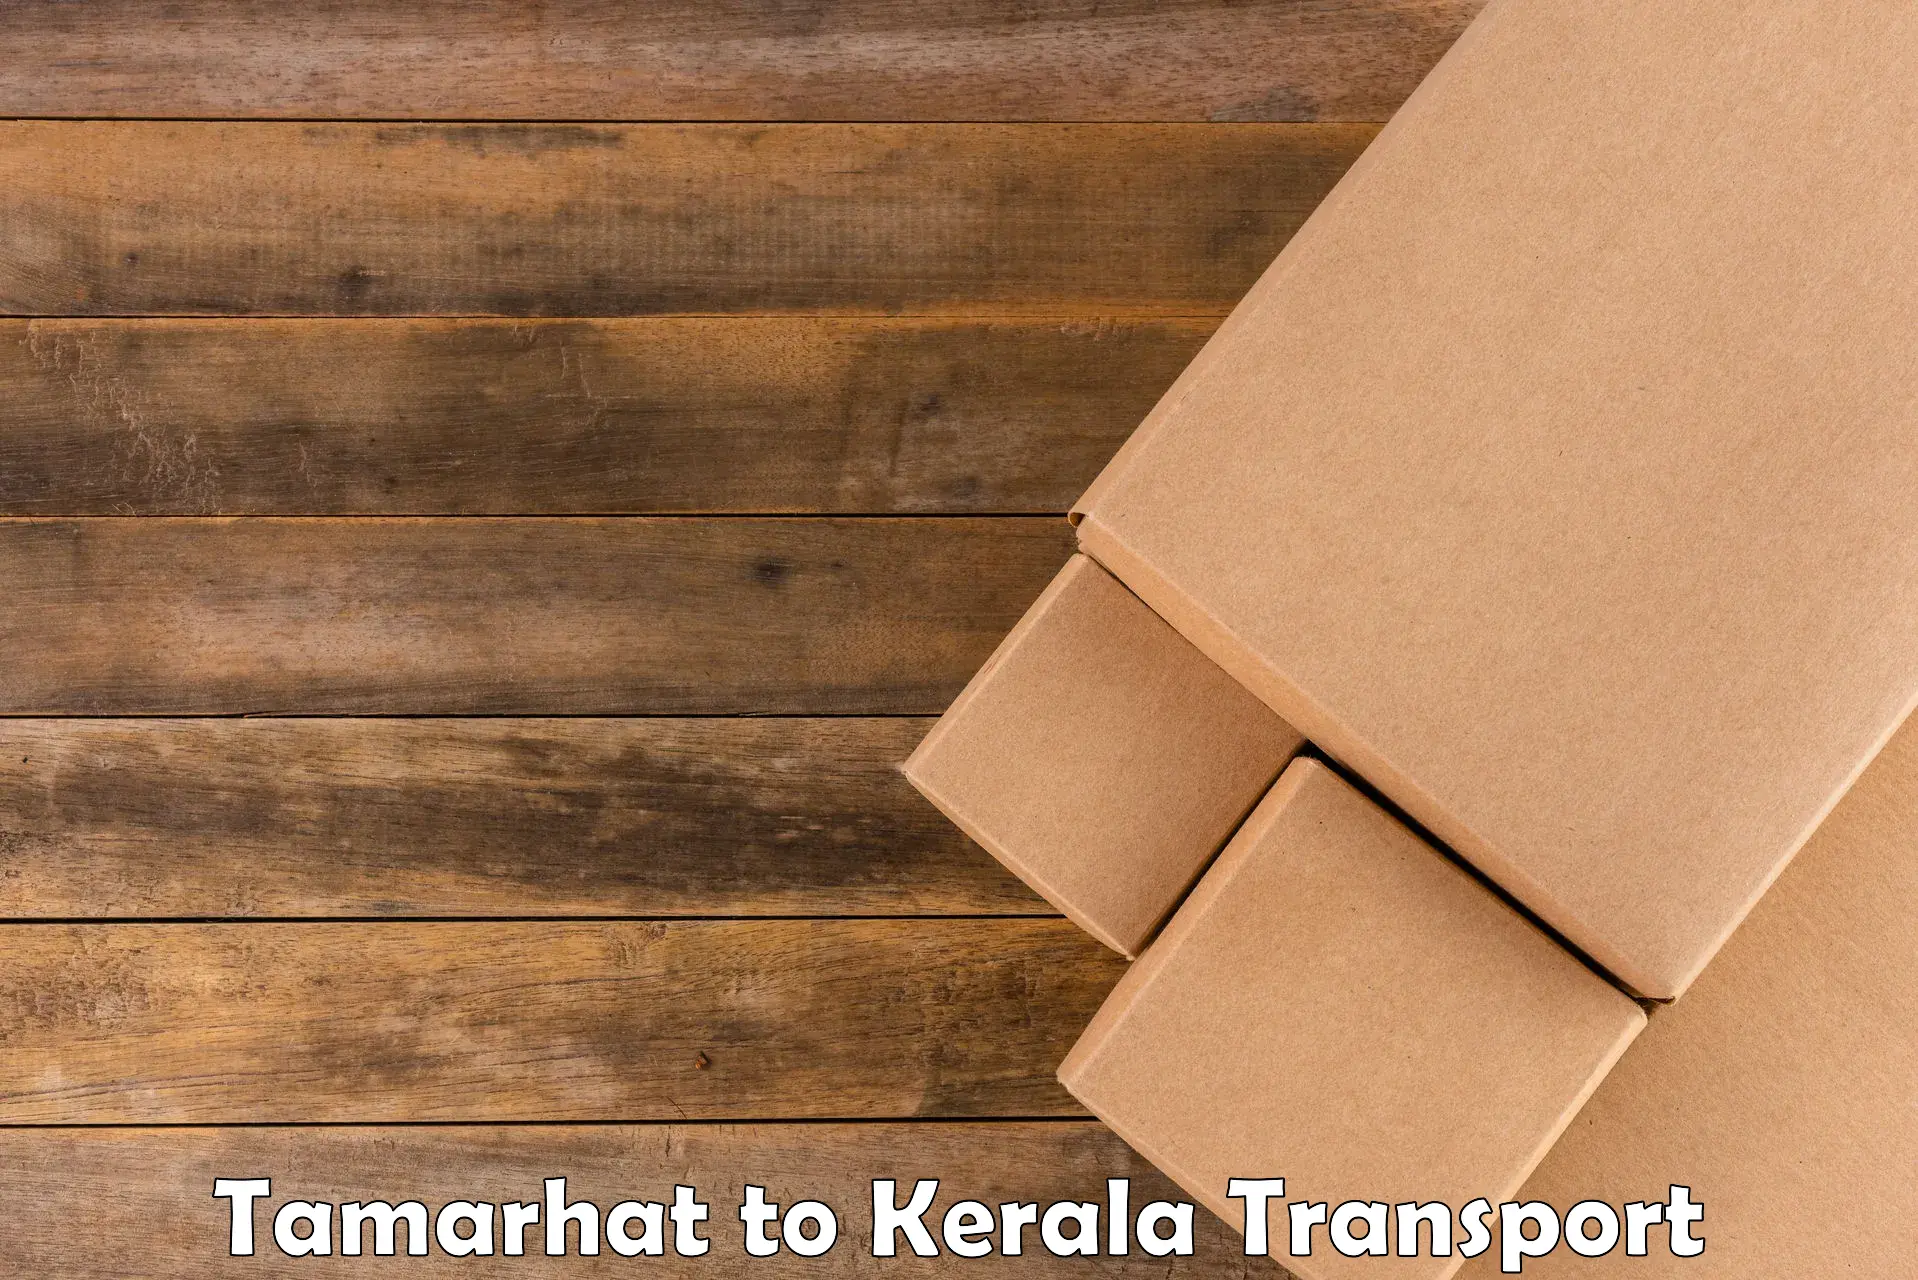 Delivery service Tamarhat to Thrissur